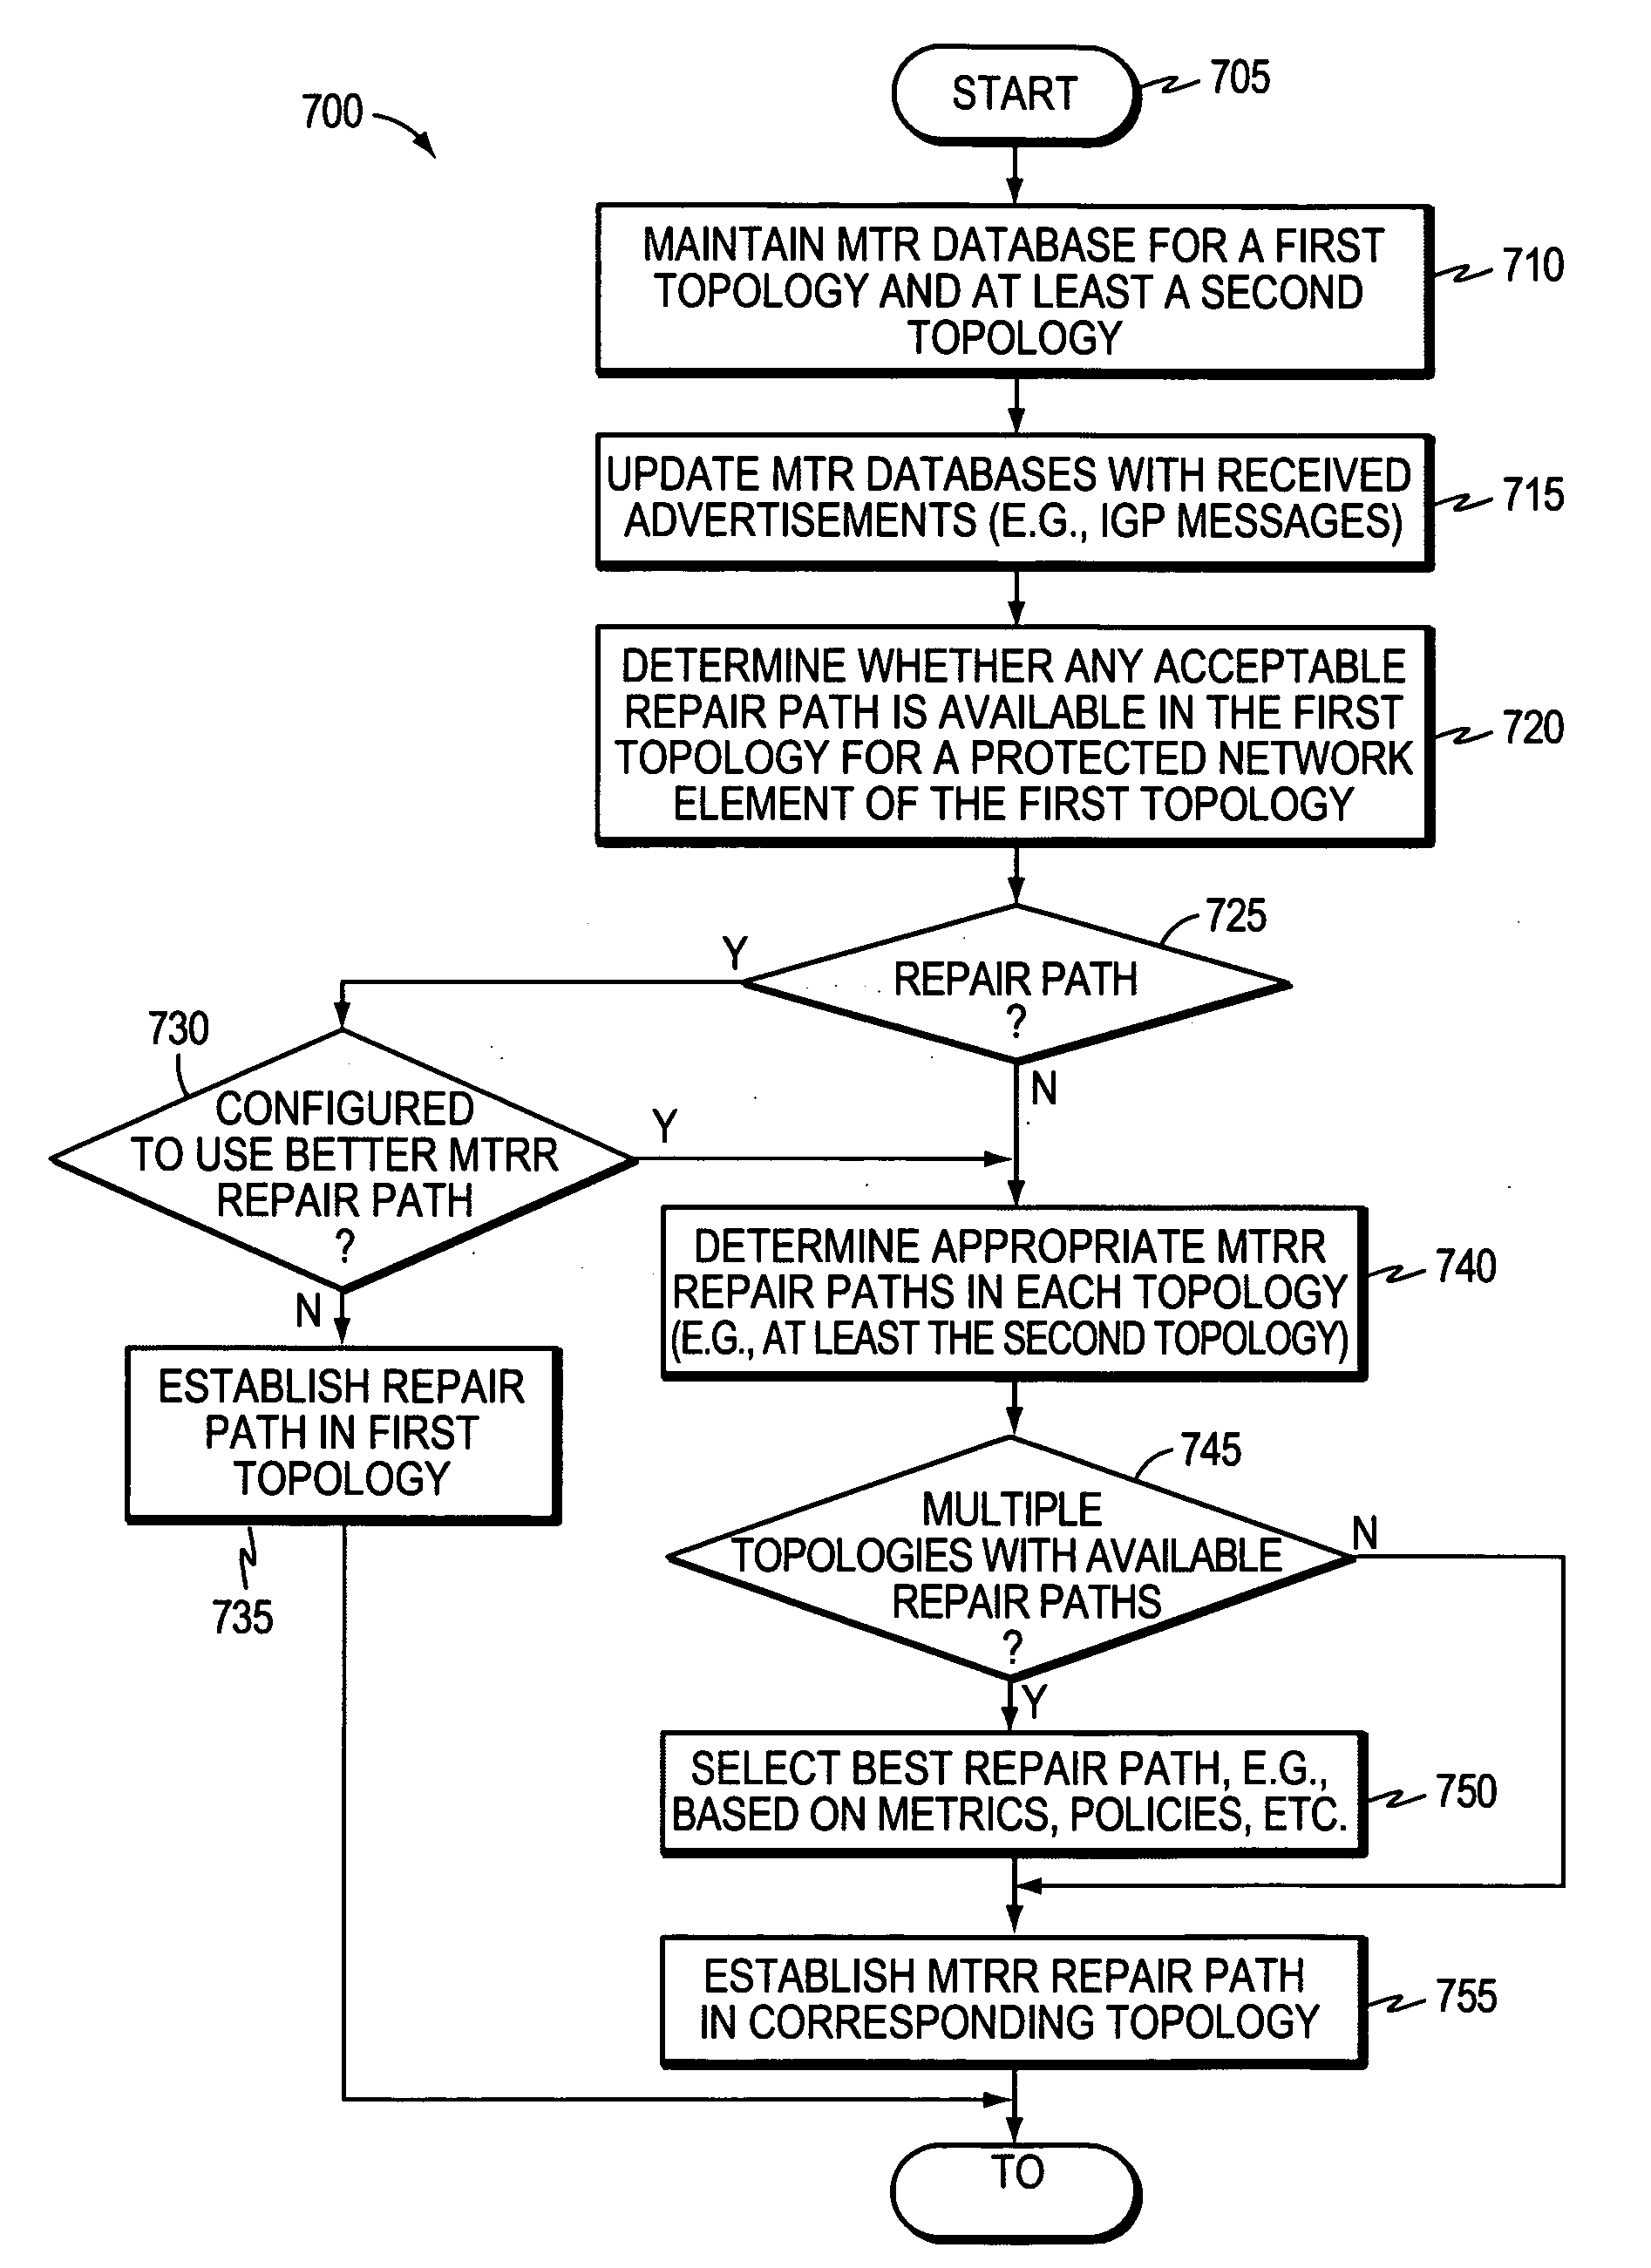 Technique for protecting against failure of a network element using Multi-Topology Repair Routing (MTRR)